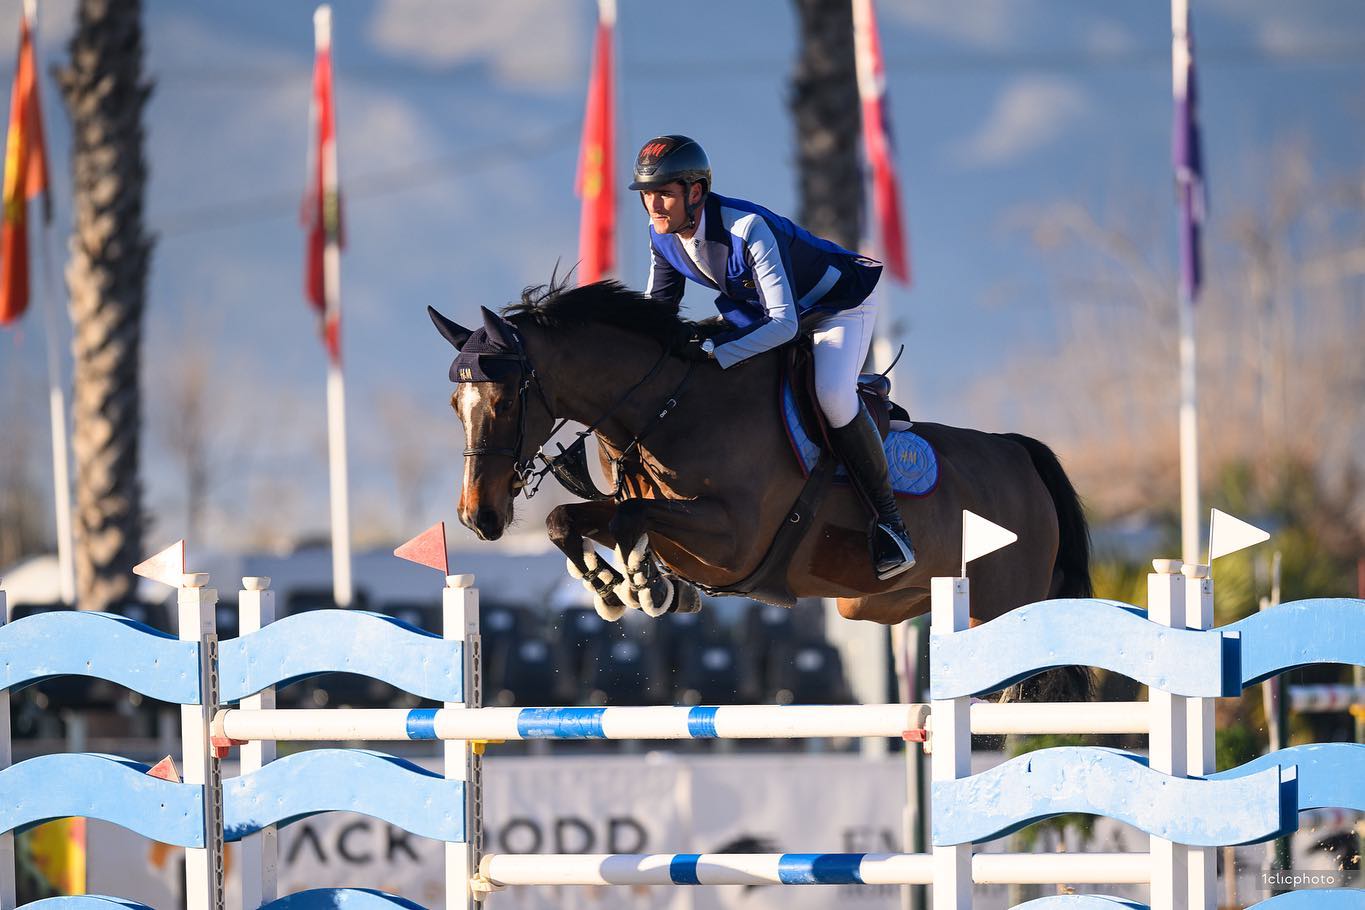 Stockholm Hearts take the lead in GCL Madrid